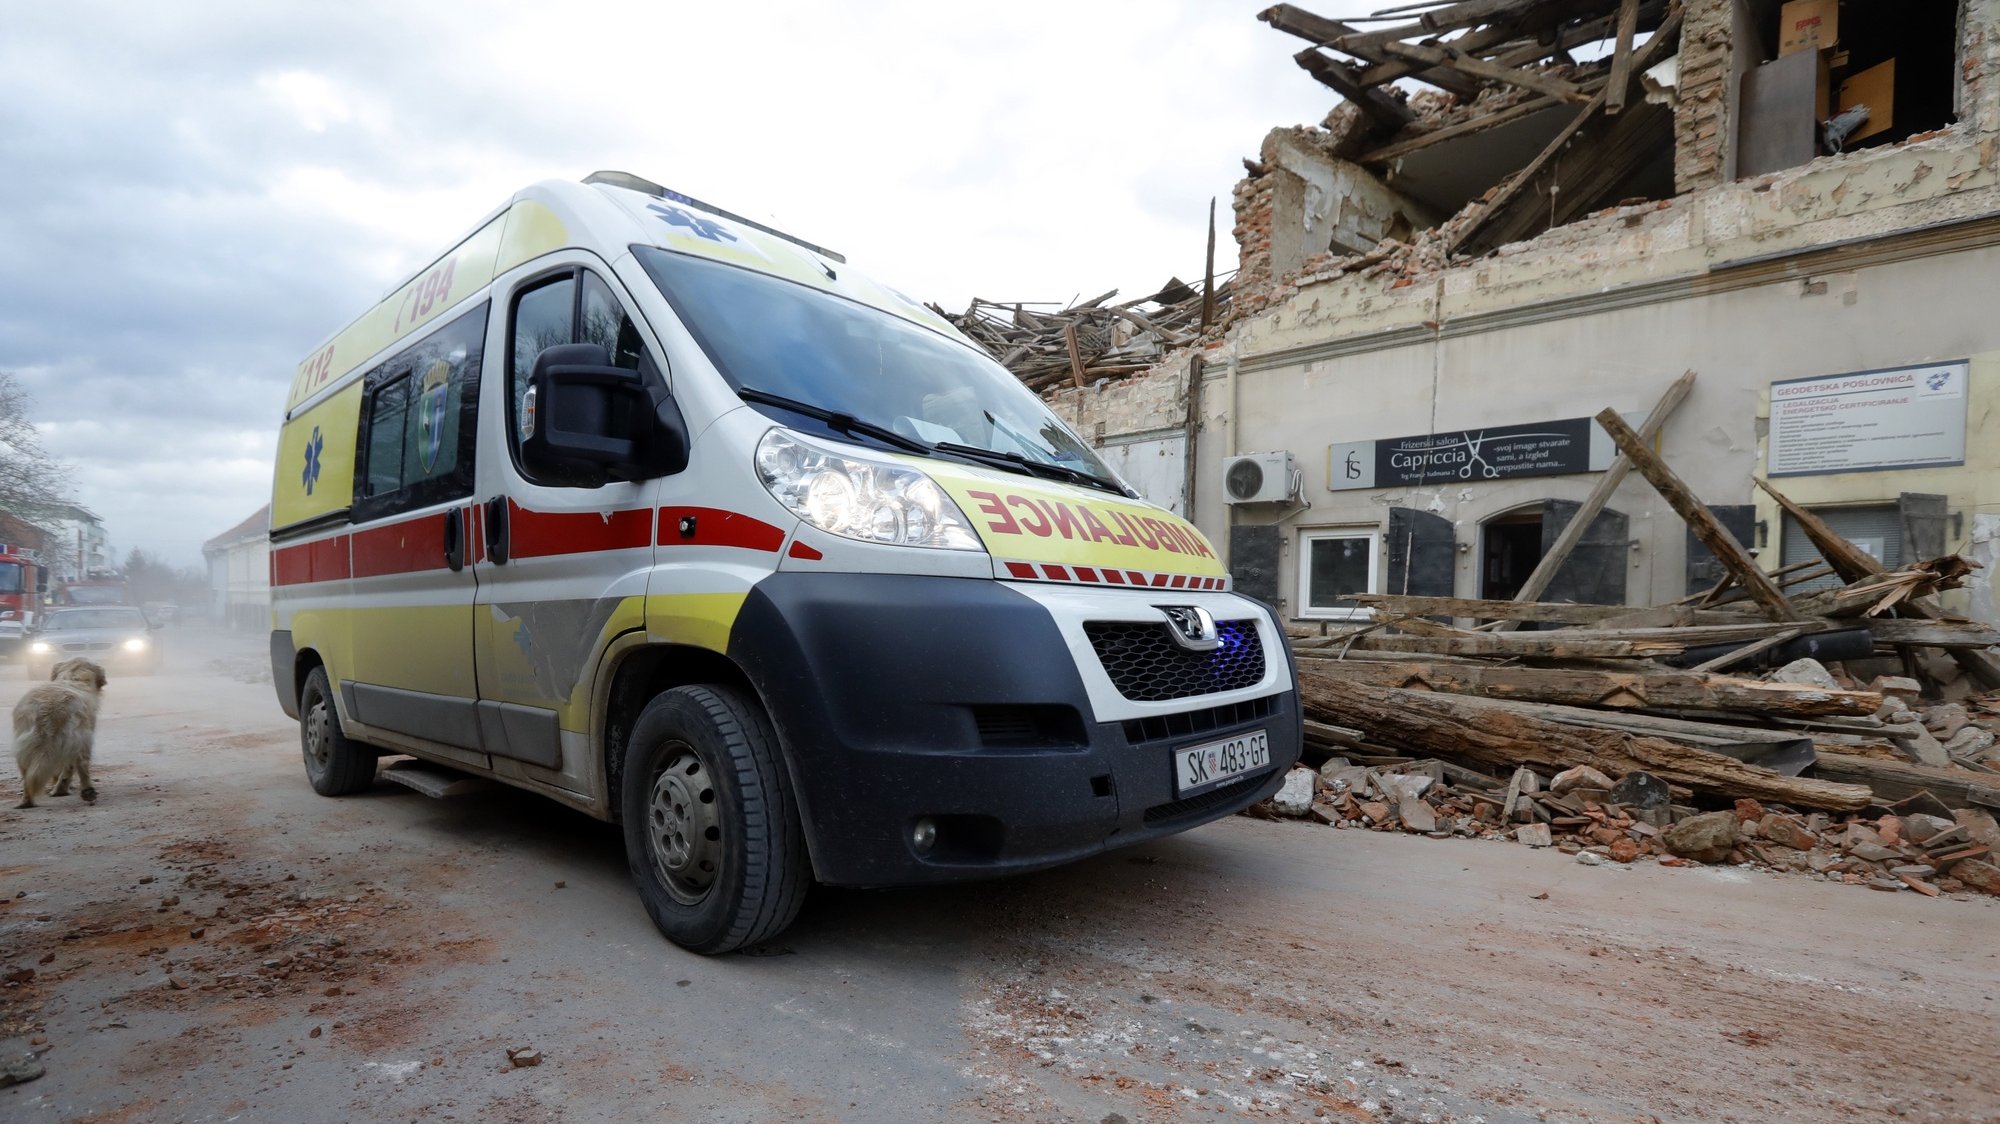 epa08909780 An ambulance drives past buildings damaged in an earthquake in Petrinja, Croatia, 29 December 2020. A 6.4 magnitude earthquake struck around 3km west south west of the town with reports of many injuries and at least one death.  EPA/ANTONIO BAT